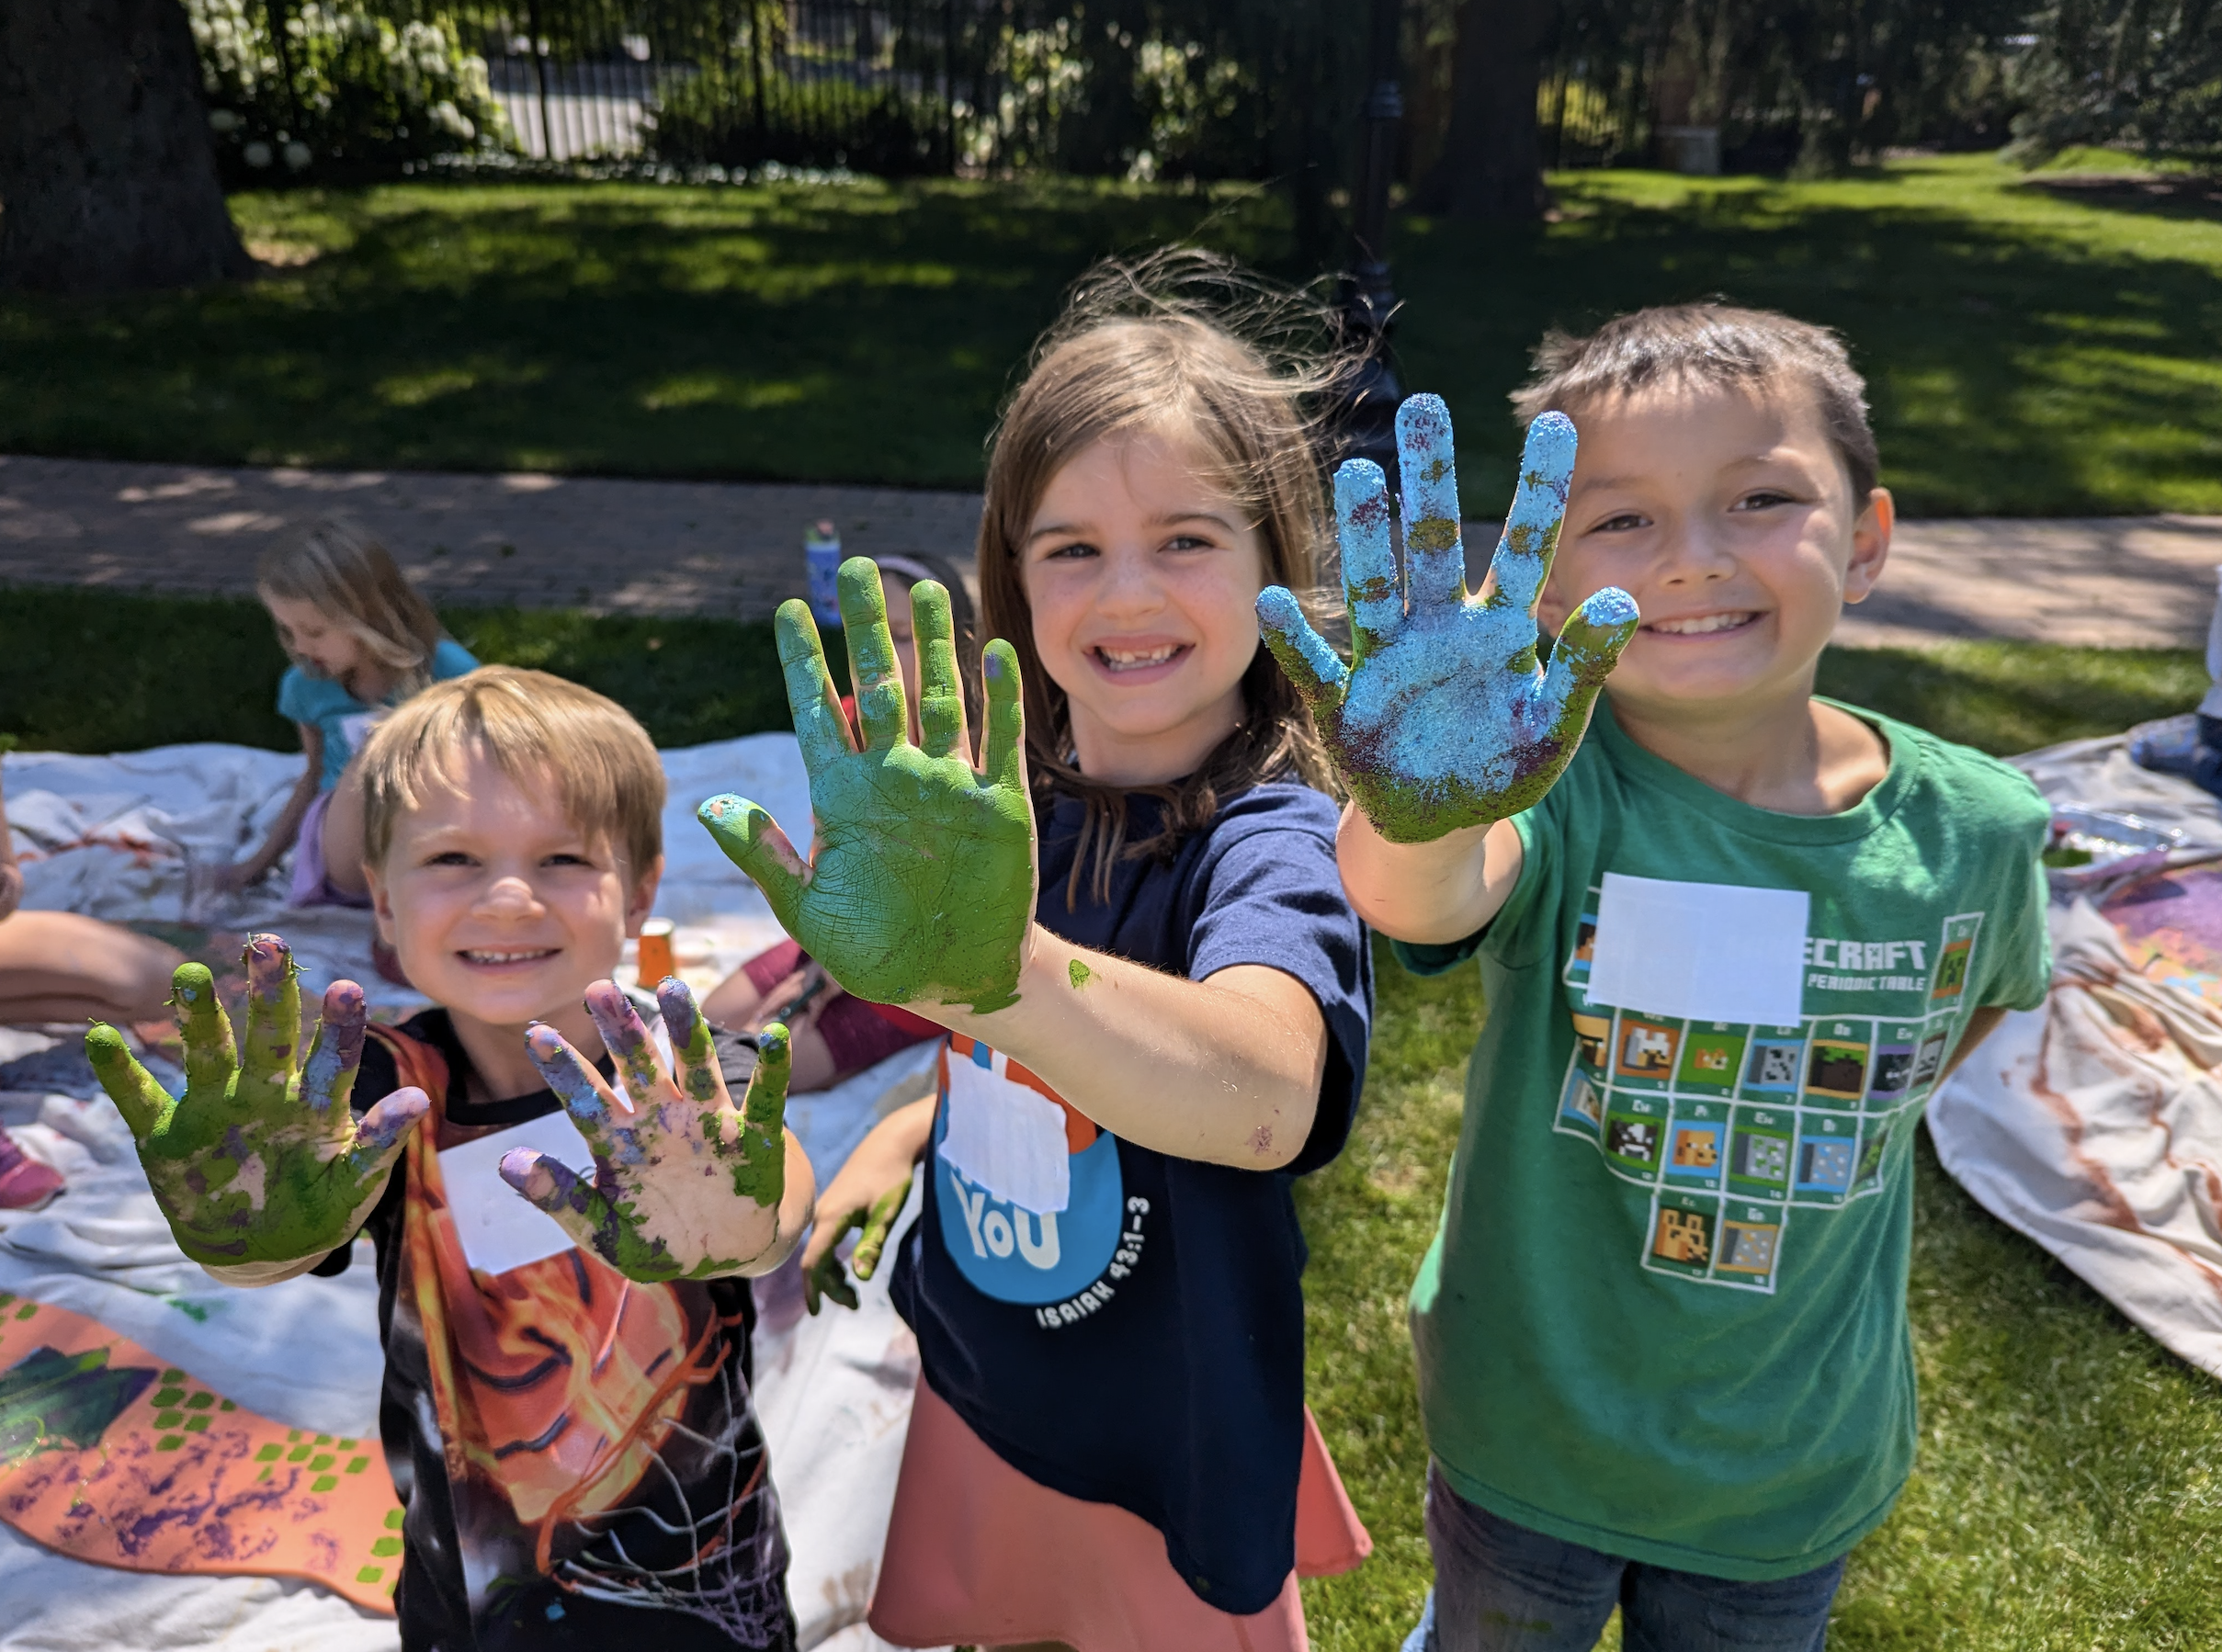 Three Summer Art Session participants with "painty hands" after creating a sculpture together.